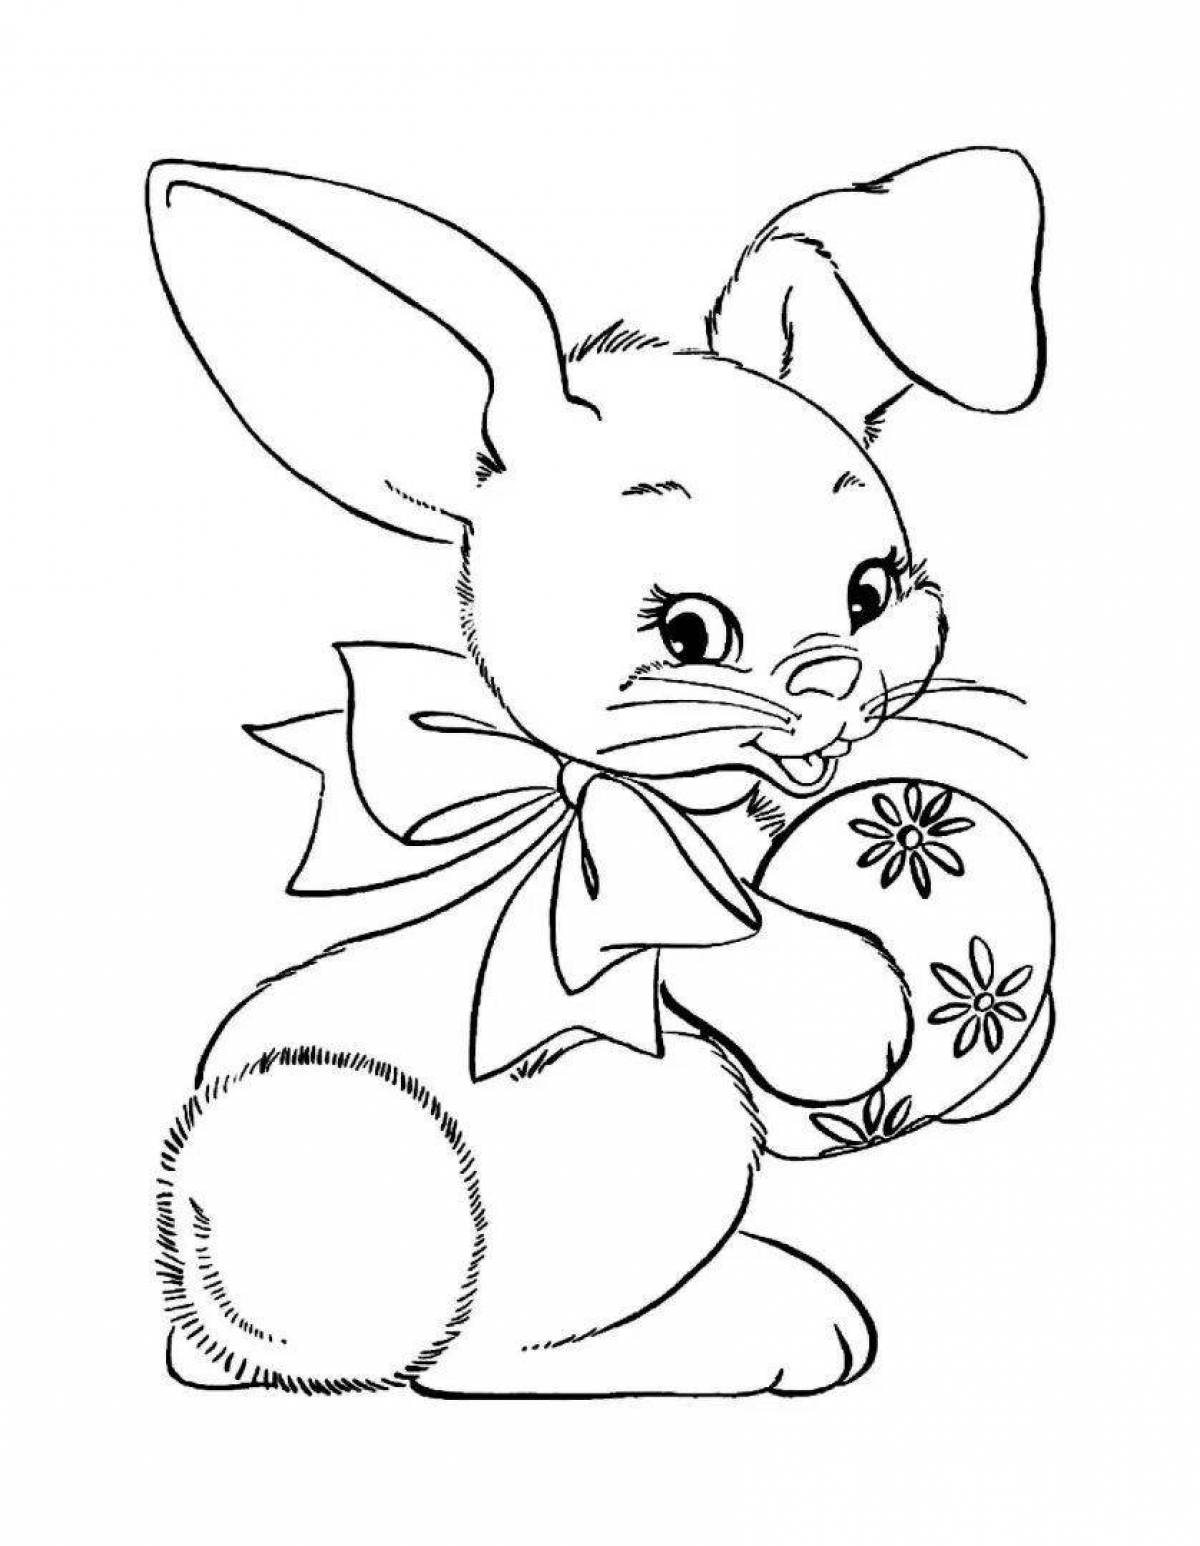 Exquisite hare coloring page